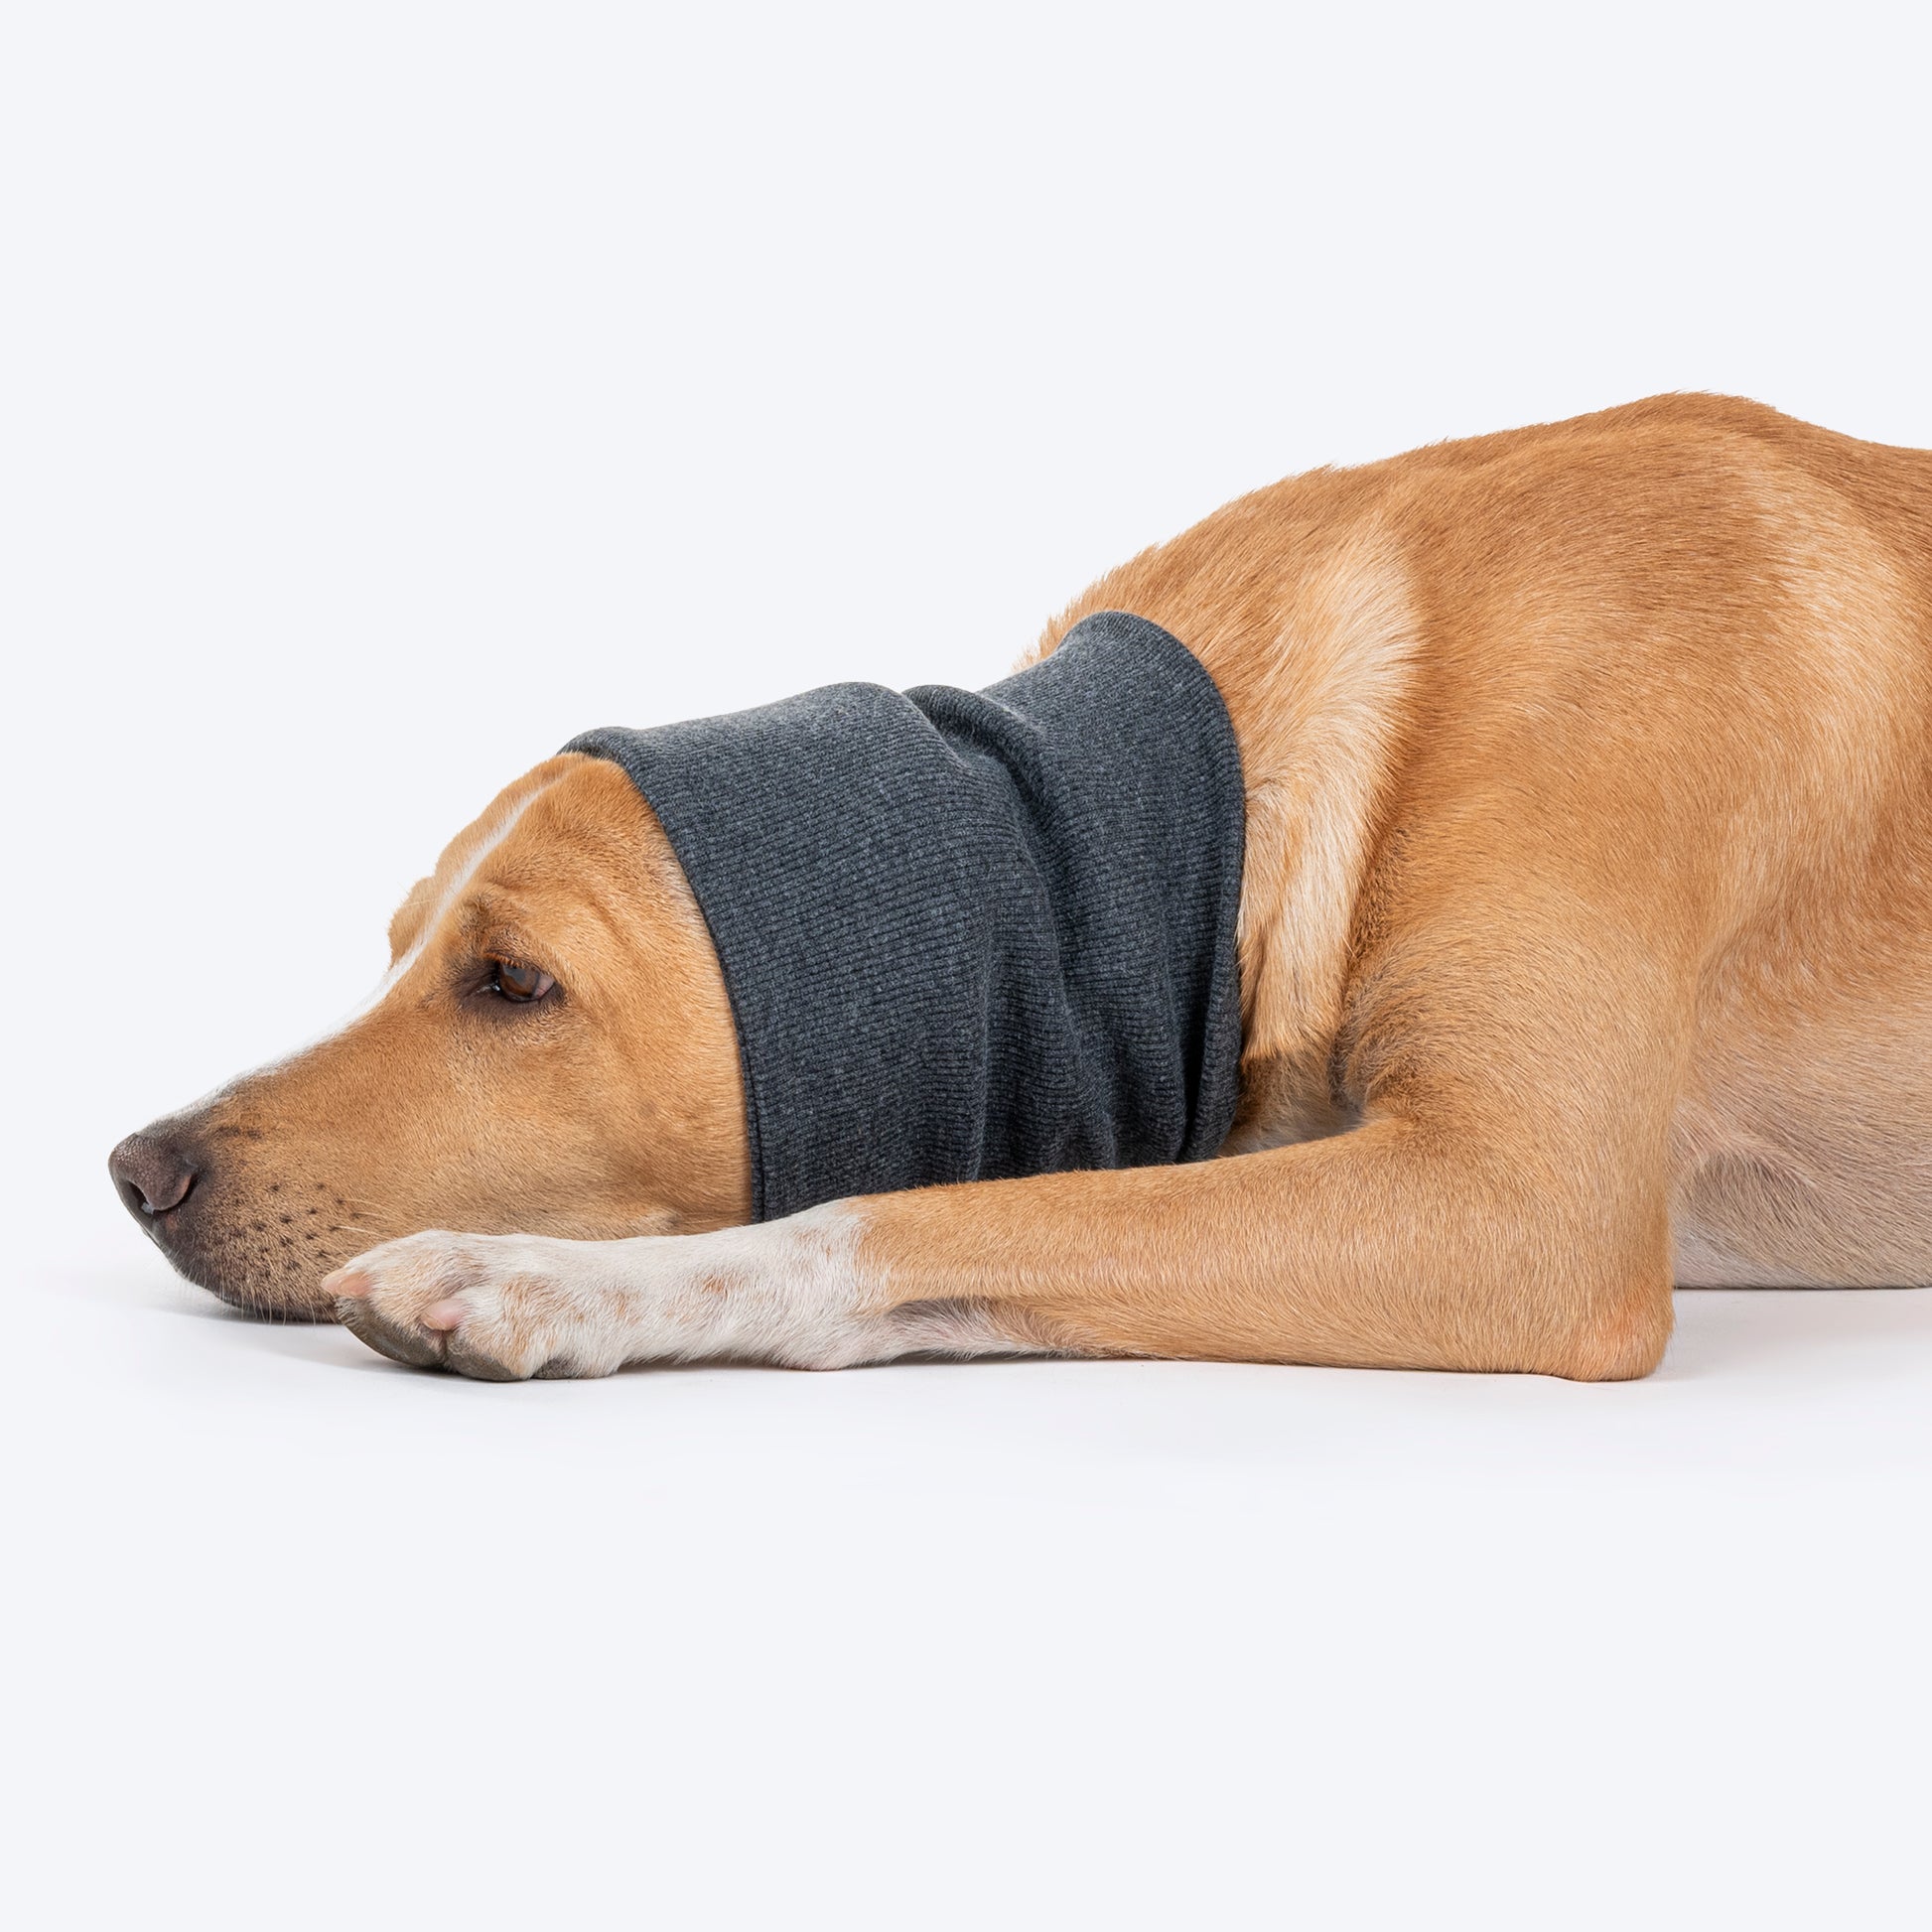 HUFT Noise-Out Hoodies - Doggie Ear Muffs - Dark Grey Milange - Heads Up For Tails